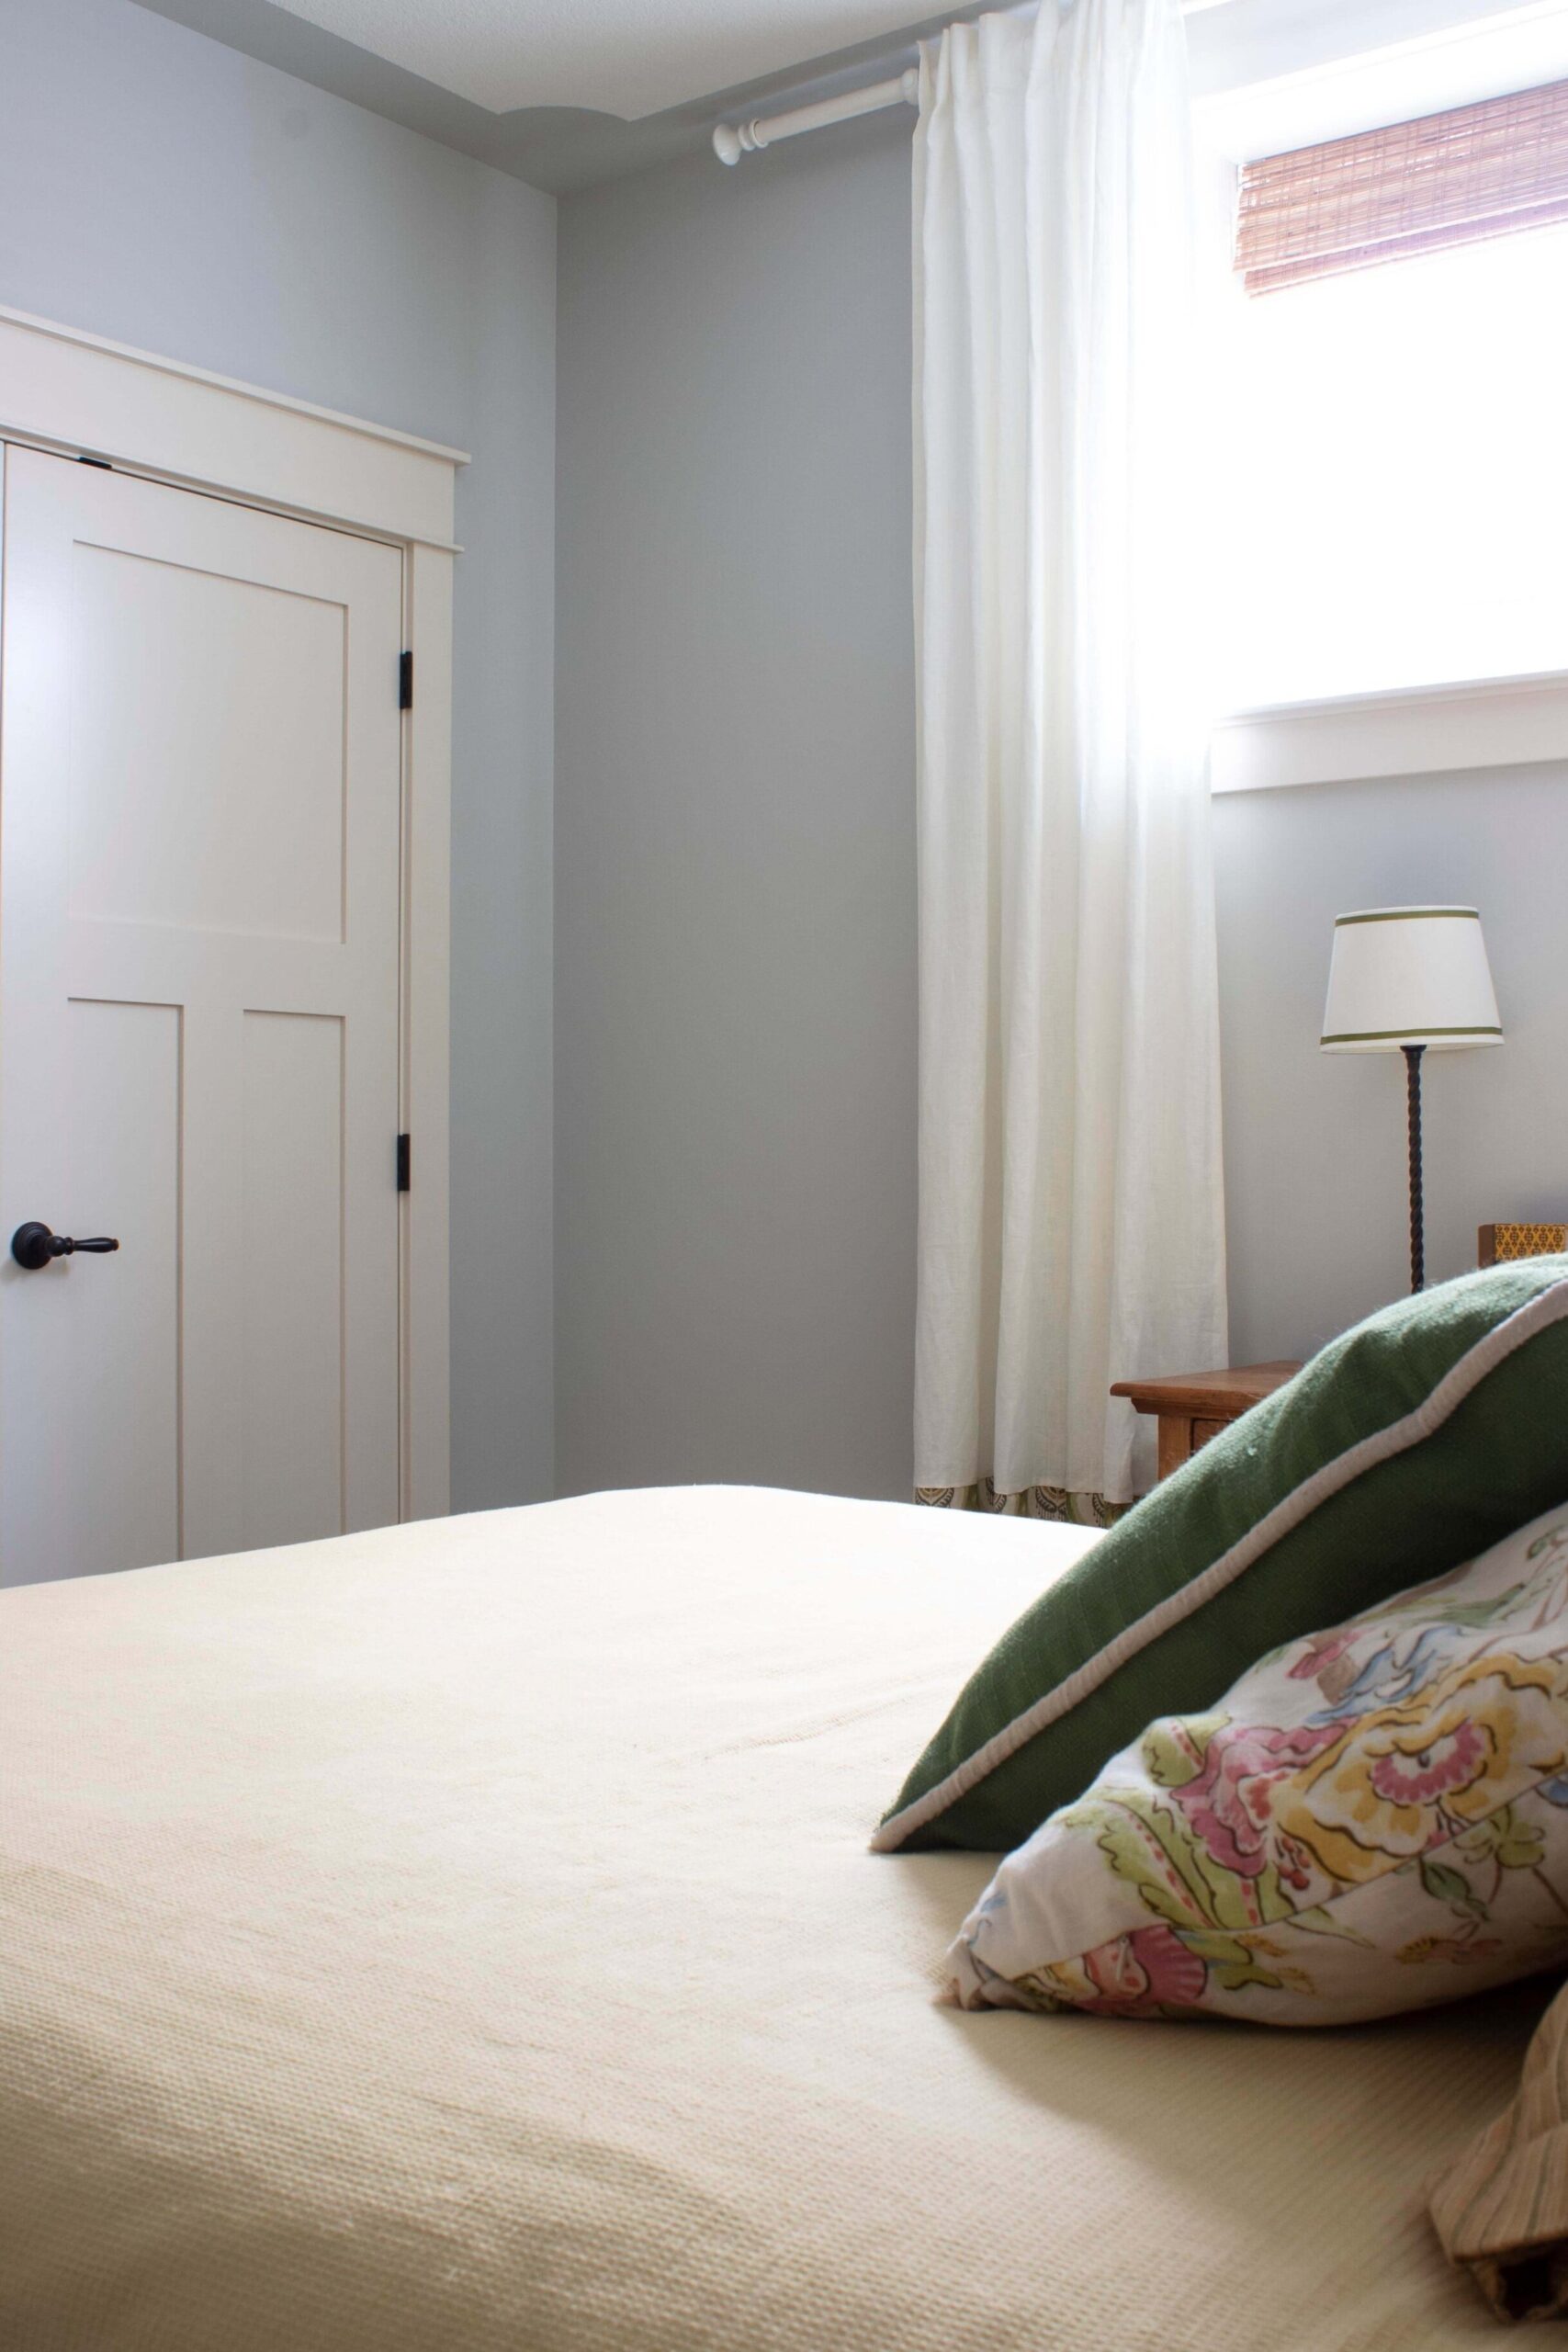 View over bed with white closet doors in background, grey walls, white curtains, green and floral pillows on bed